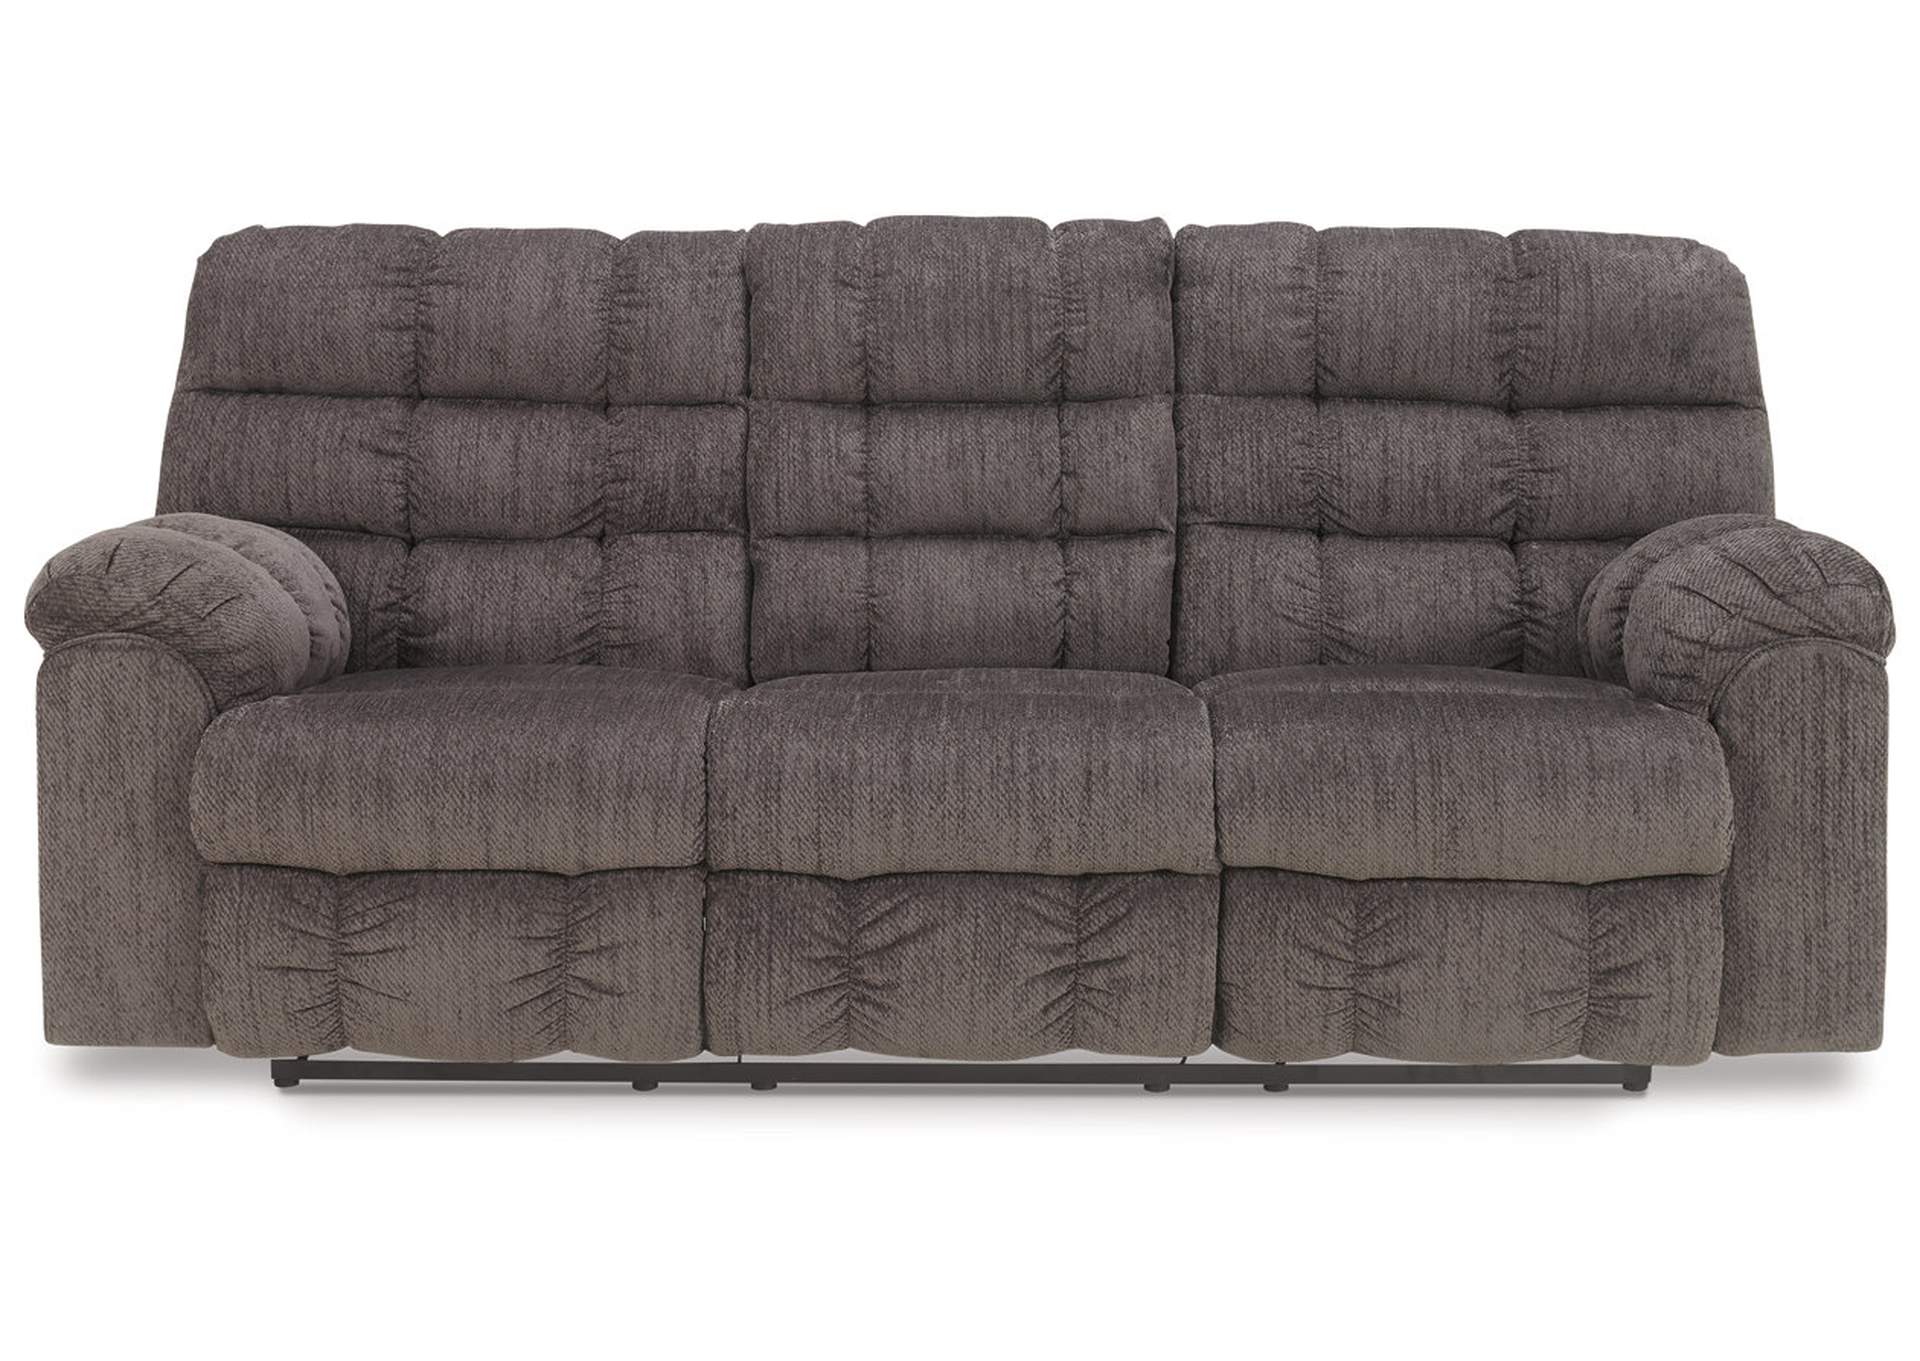 Acieona Reclining Sofa with Drop Down Table,Signature Design By Ashley